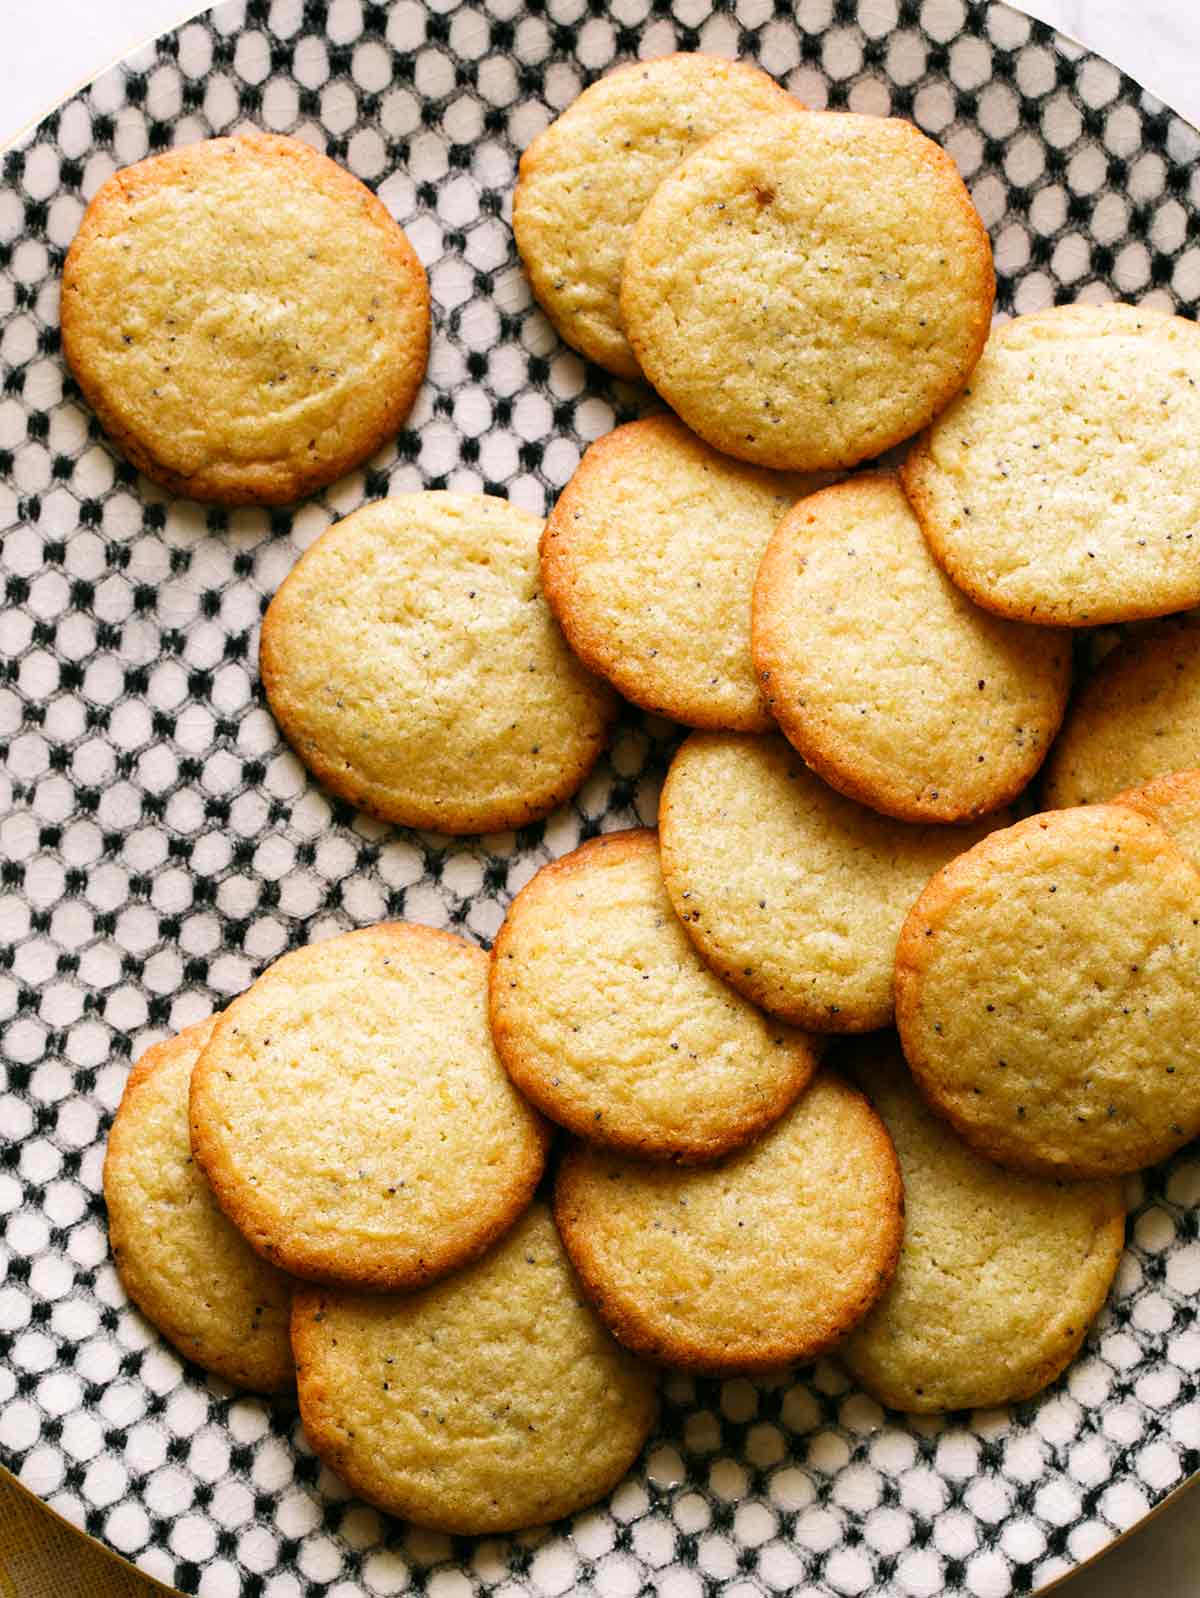 Pile of chewy lemon cookies on black and white plate.